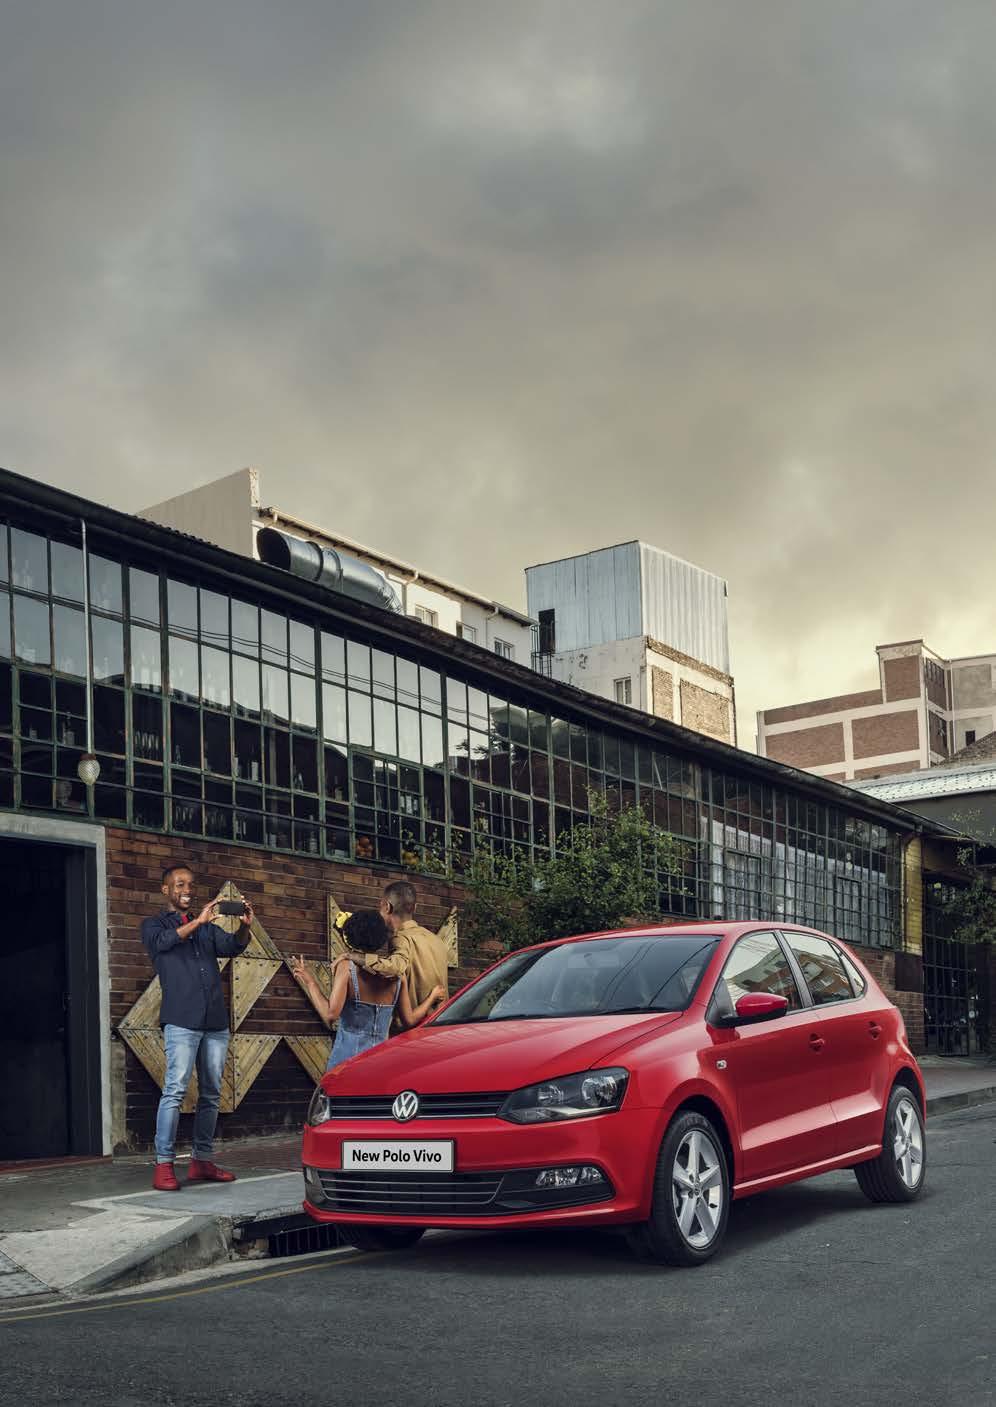 Share the ride. The new Polo Vivo is here and it s equipped with a variety of features to suit you and your crew.